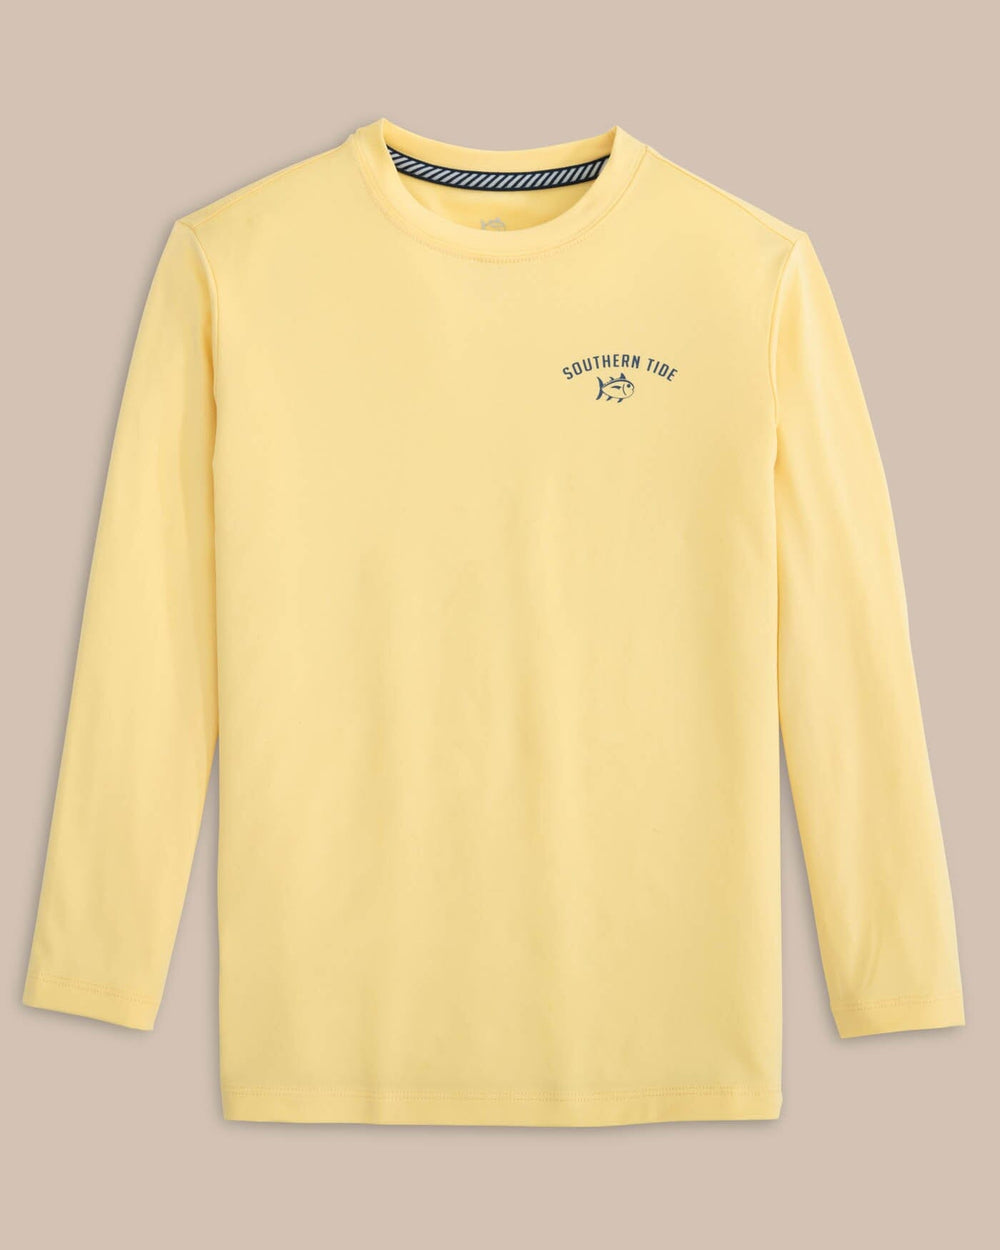 The front view of the Southern Tide Kids Sharks and Skipjacks Performance Long Sleeve T-Shirt by Southern Tide - Golden Haze Yellow